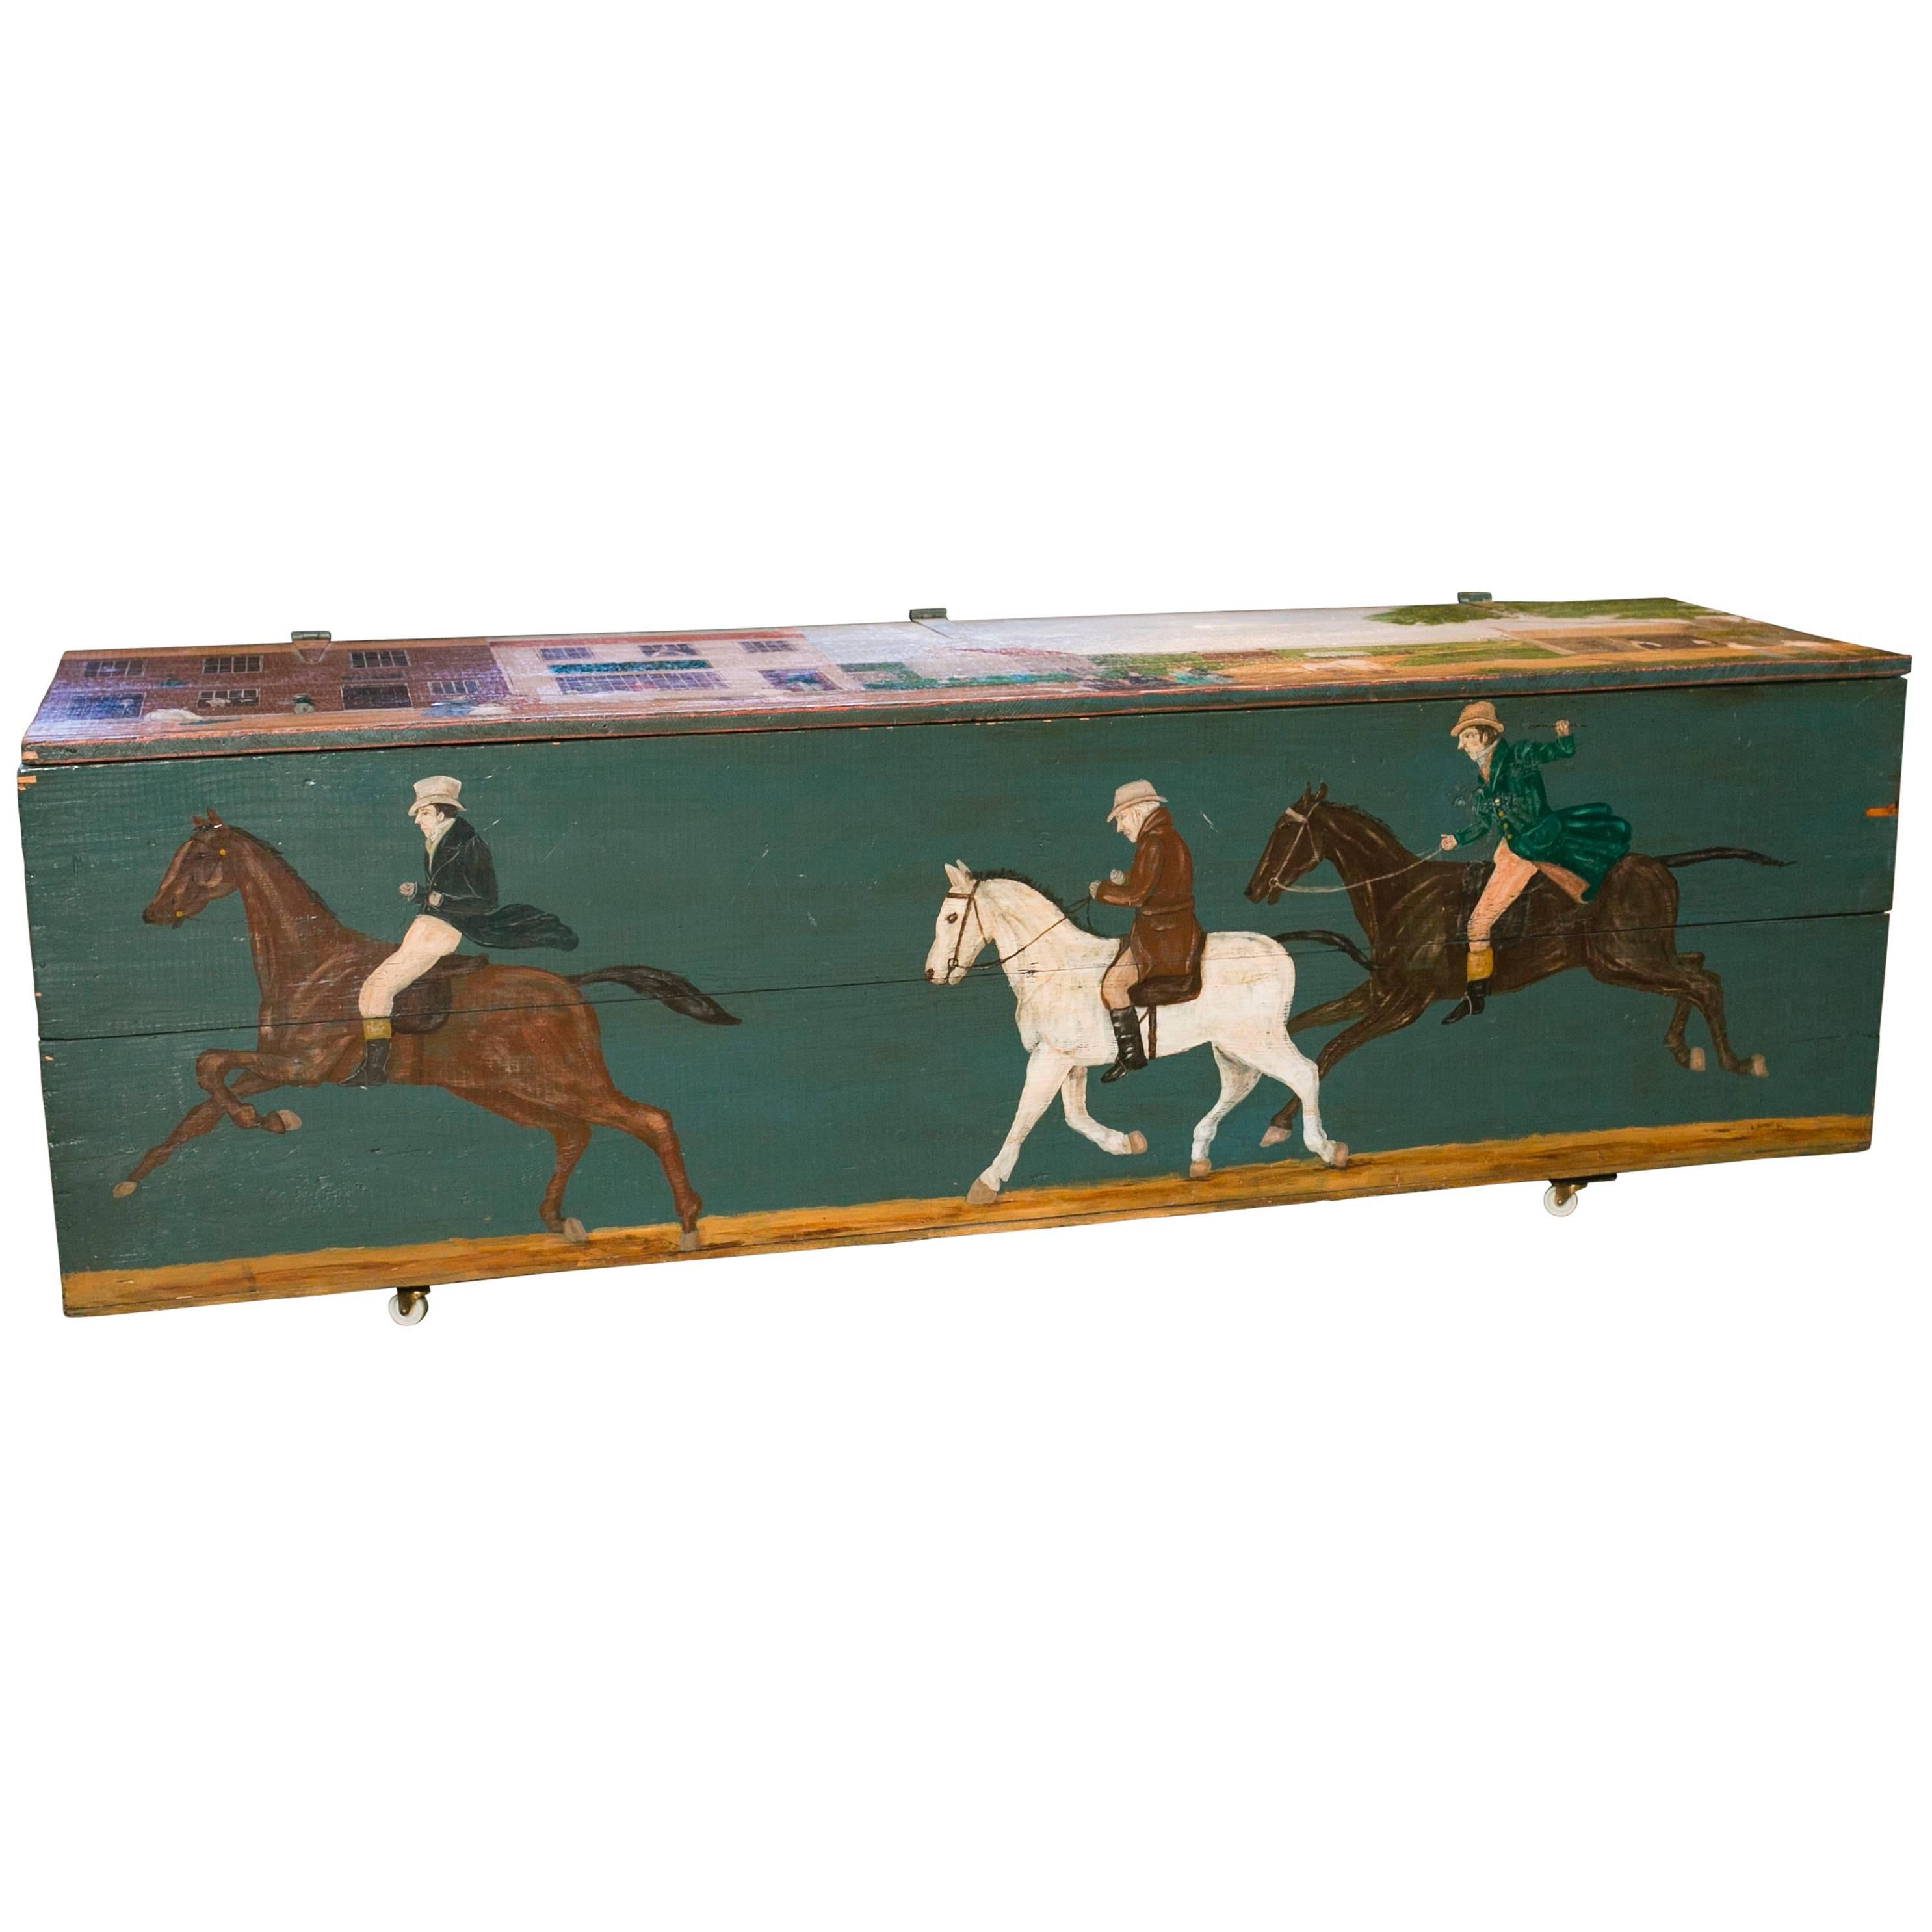  American Blanket Chest/ Bencwith Equestrian Scene Painted by Artist Lew Hudnall For Sale